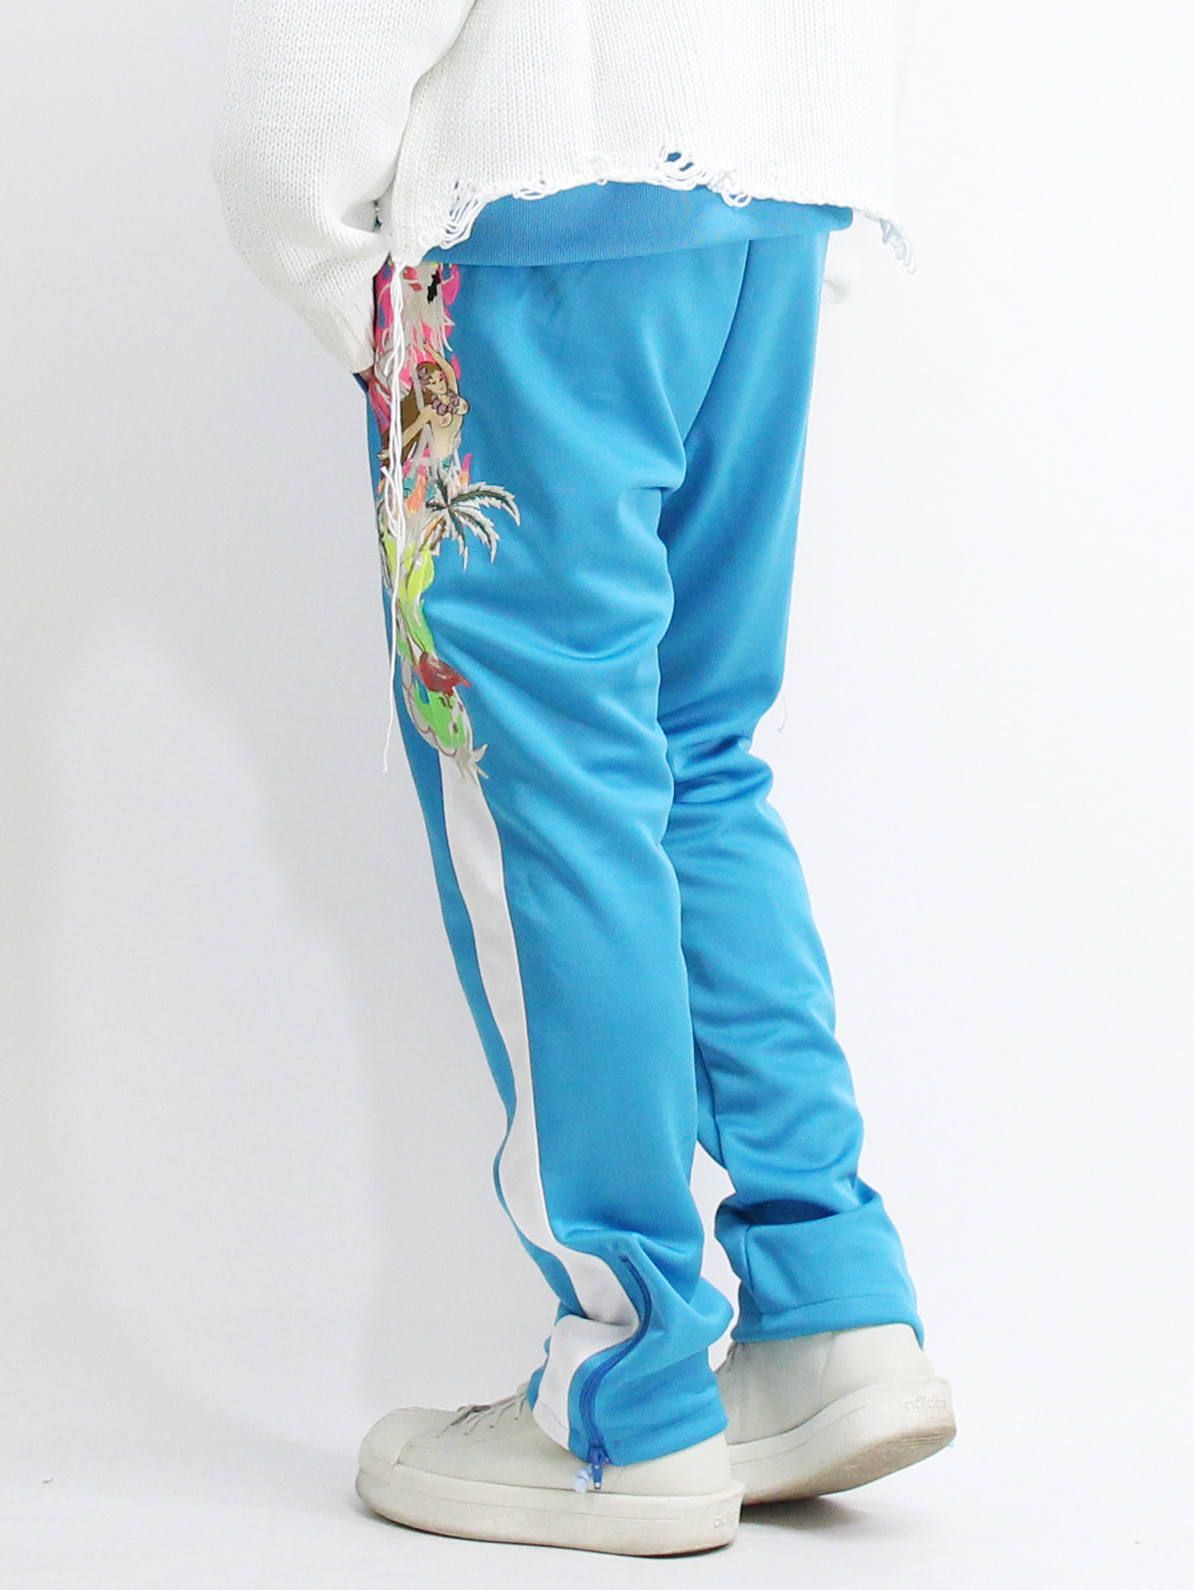 19SSカオス刺繍トラックパンツ - CHAOS EMBROIDERY TRACK PANTS - BLUE - Blue - S